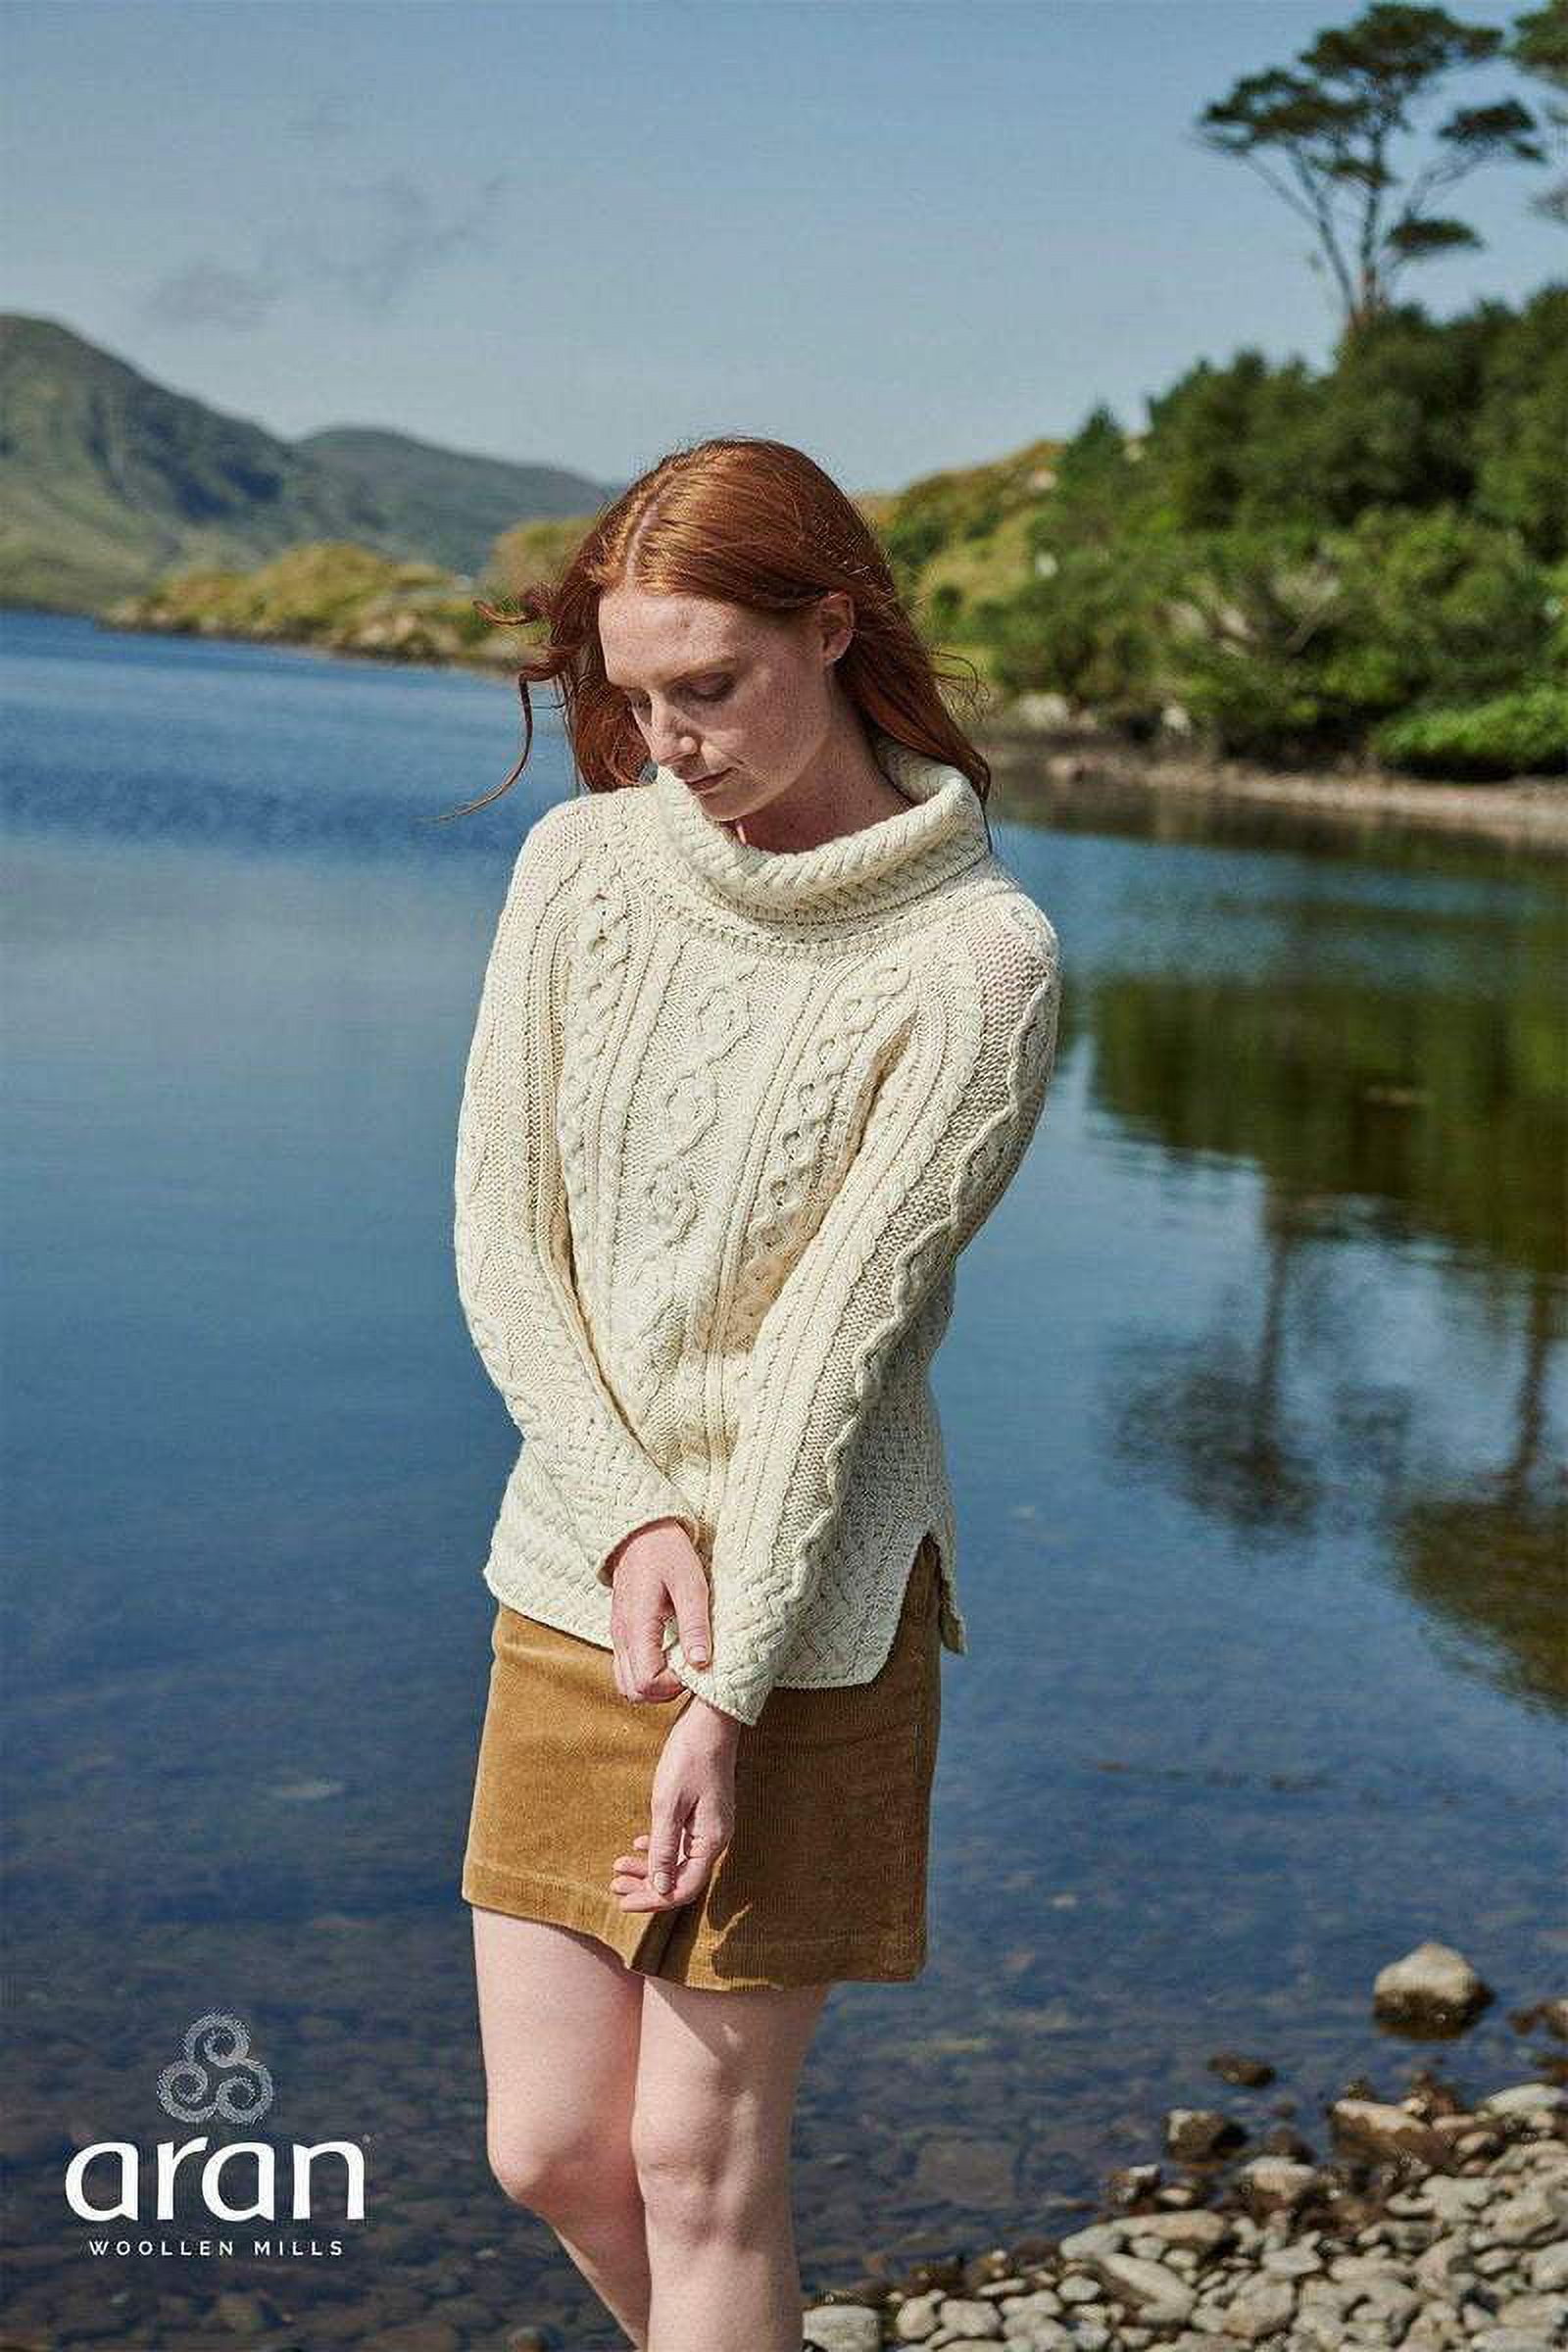 Irish Aran Cable Knitted Sweater 100% Premium Merino Wool Chunky Vented Roll Neck Pullover Women's Jumper Made in Ireland - image 3 of 8